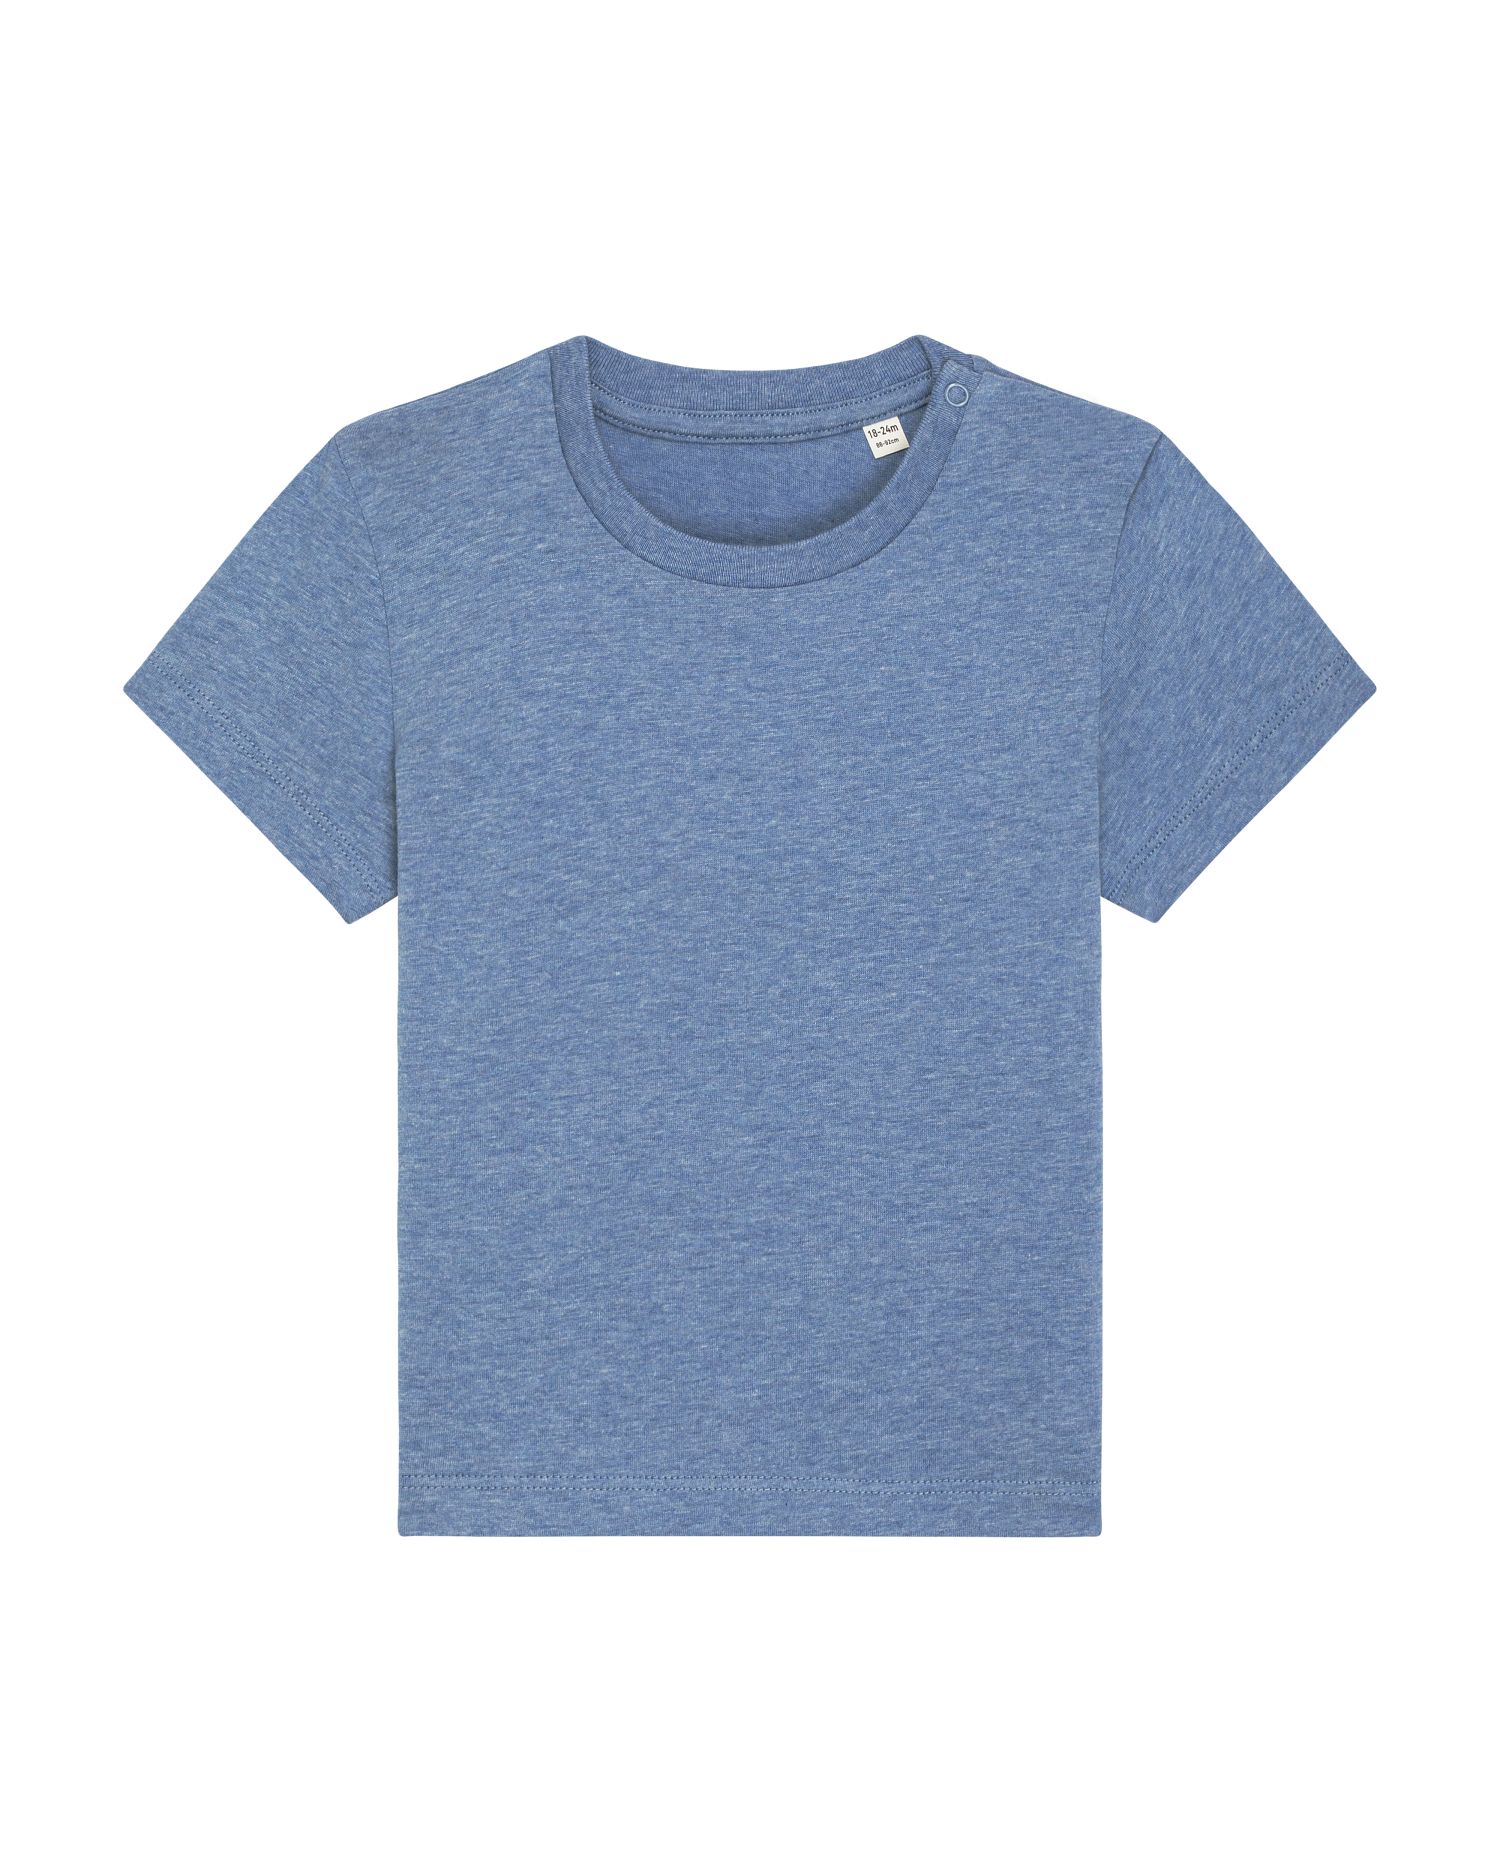 T-Shirt Baby Creator in Farbe Mid Heather Blue